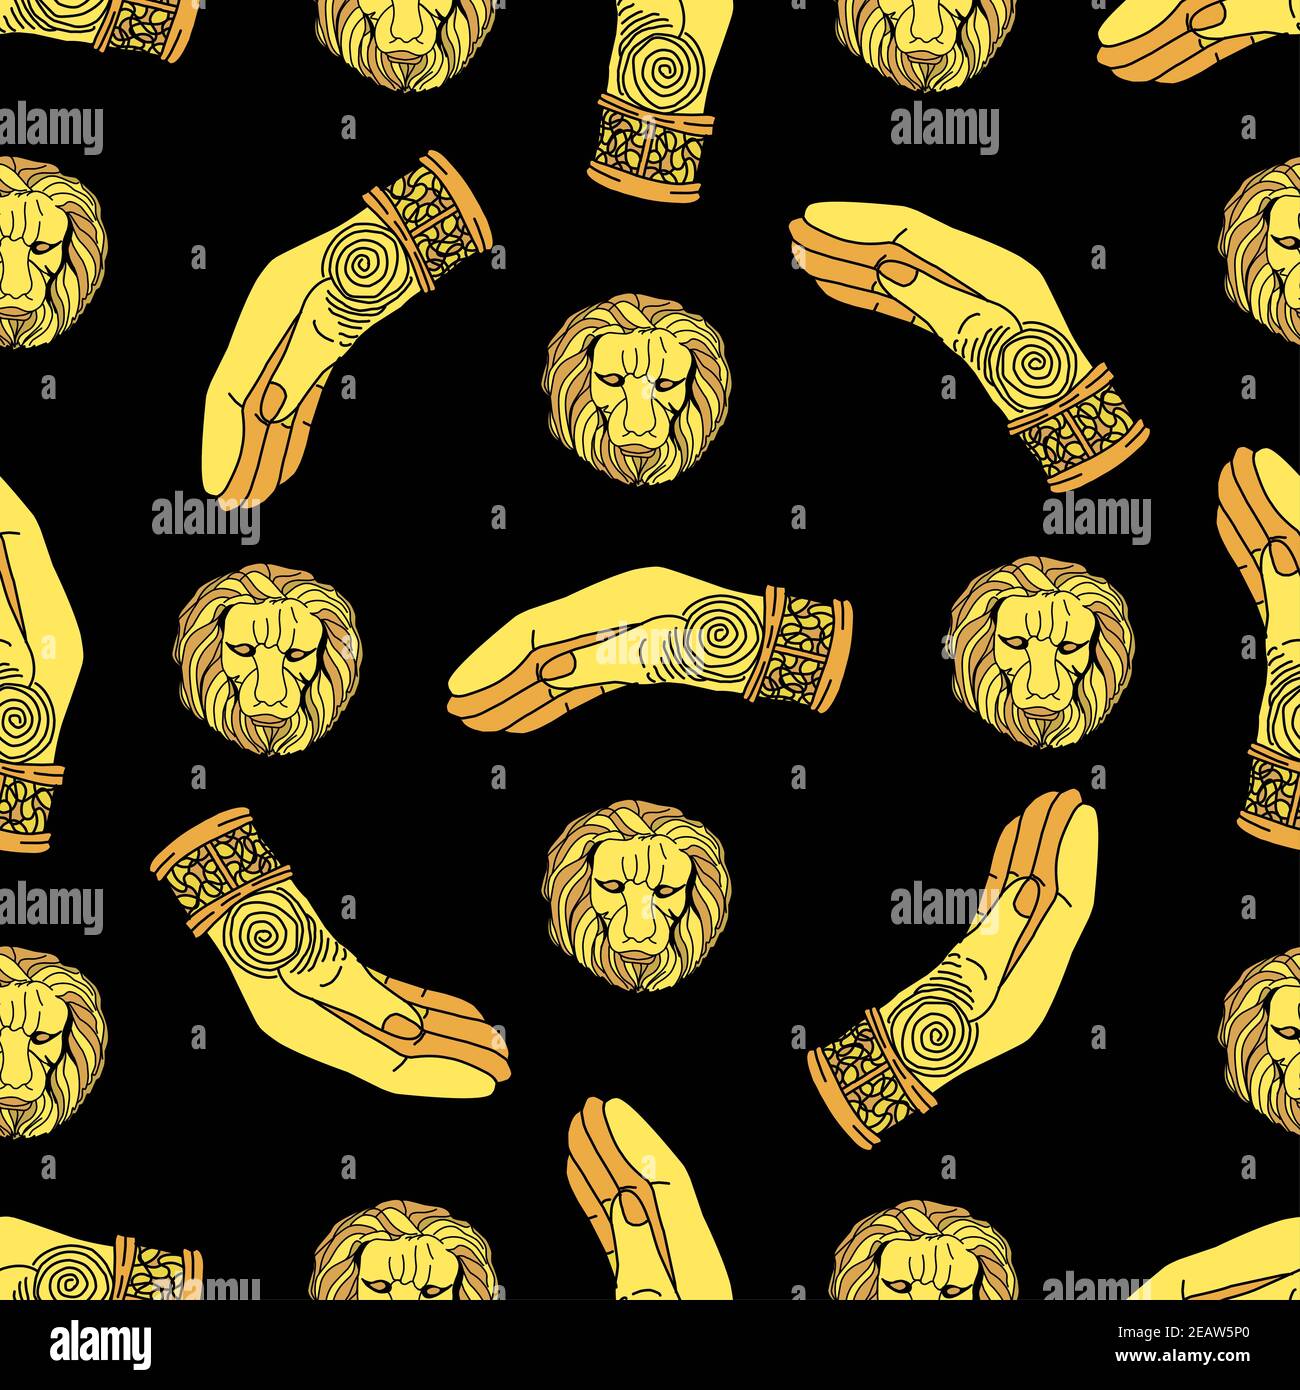 Magic pattern. gold hand prosthesis. Golden lion mask on a black background Stock Photo